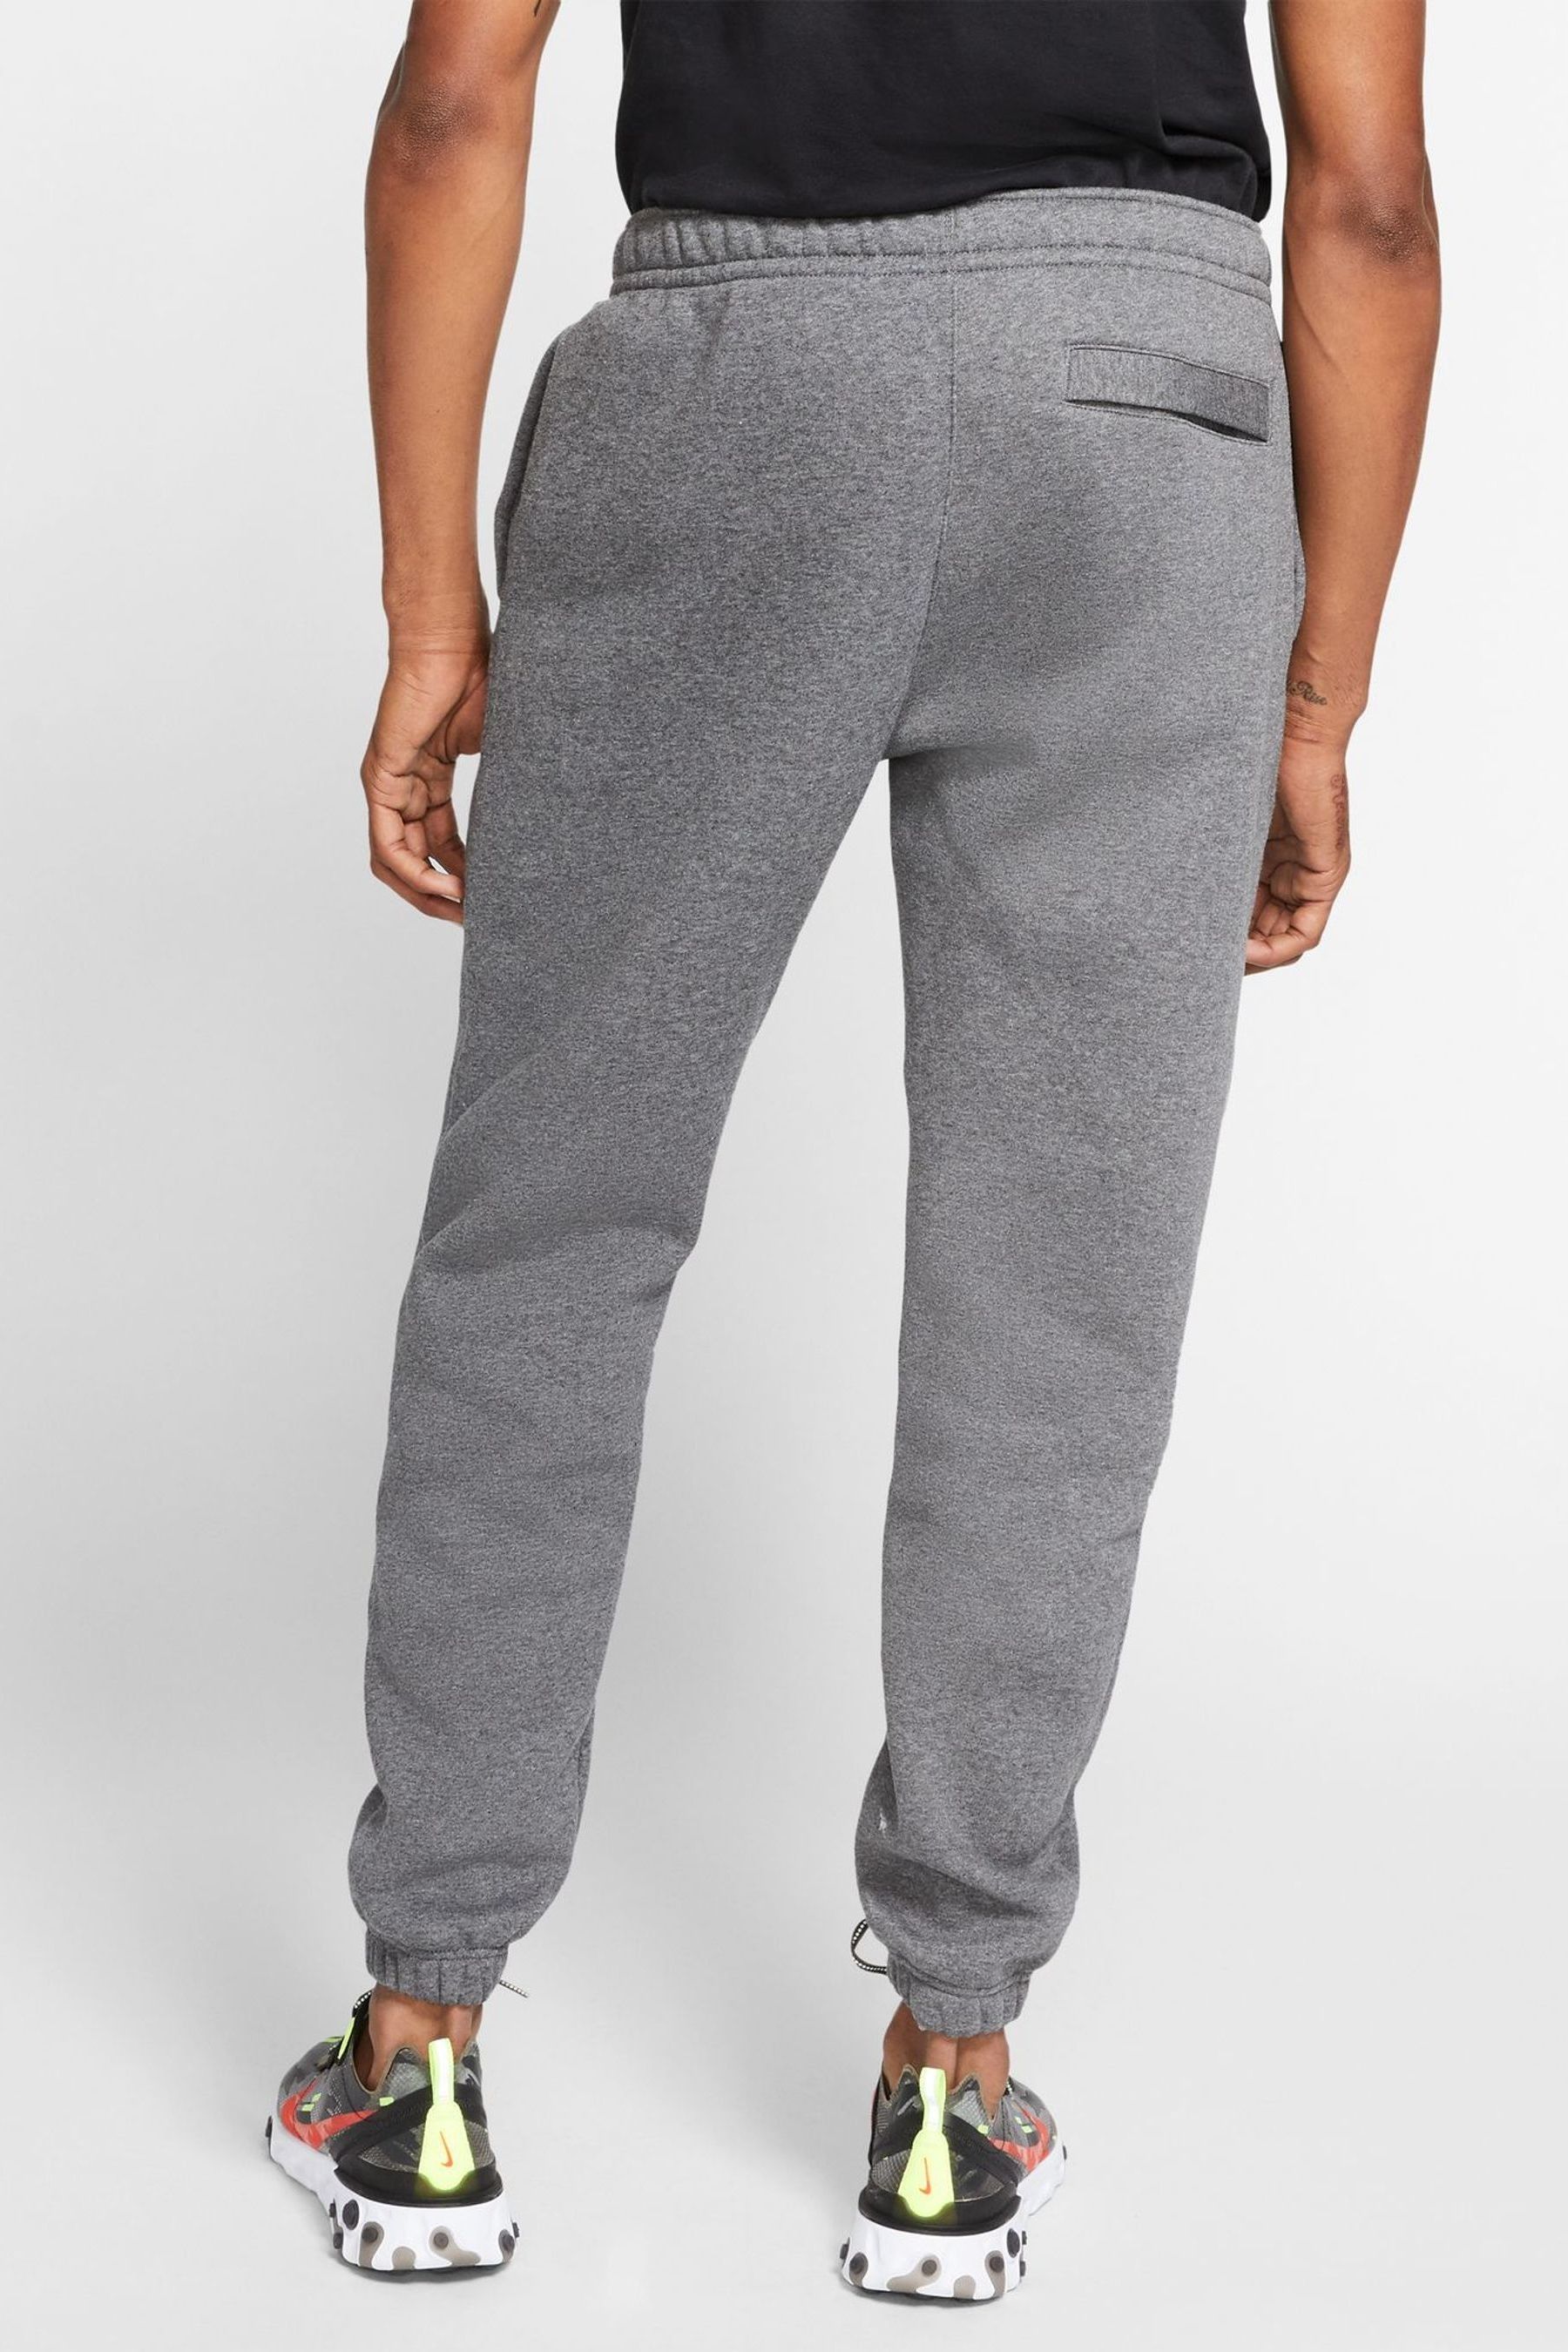 Buy Nike Charcoal Grey Club Cargo Joggers from the Next UK online shop